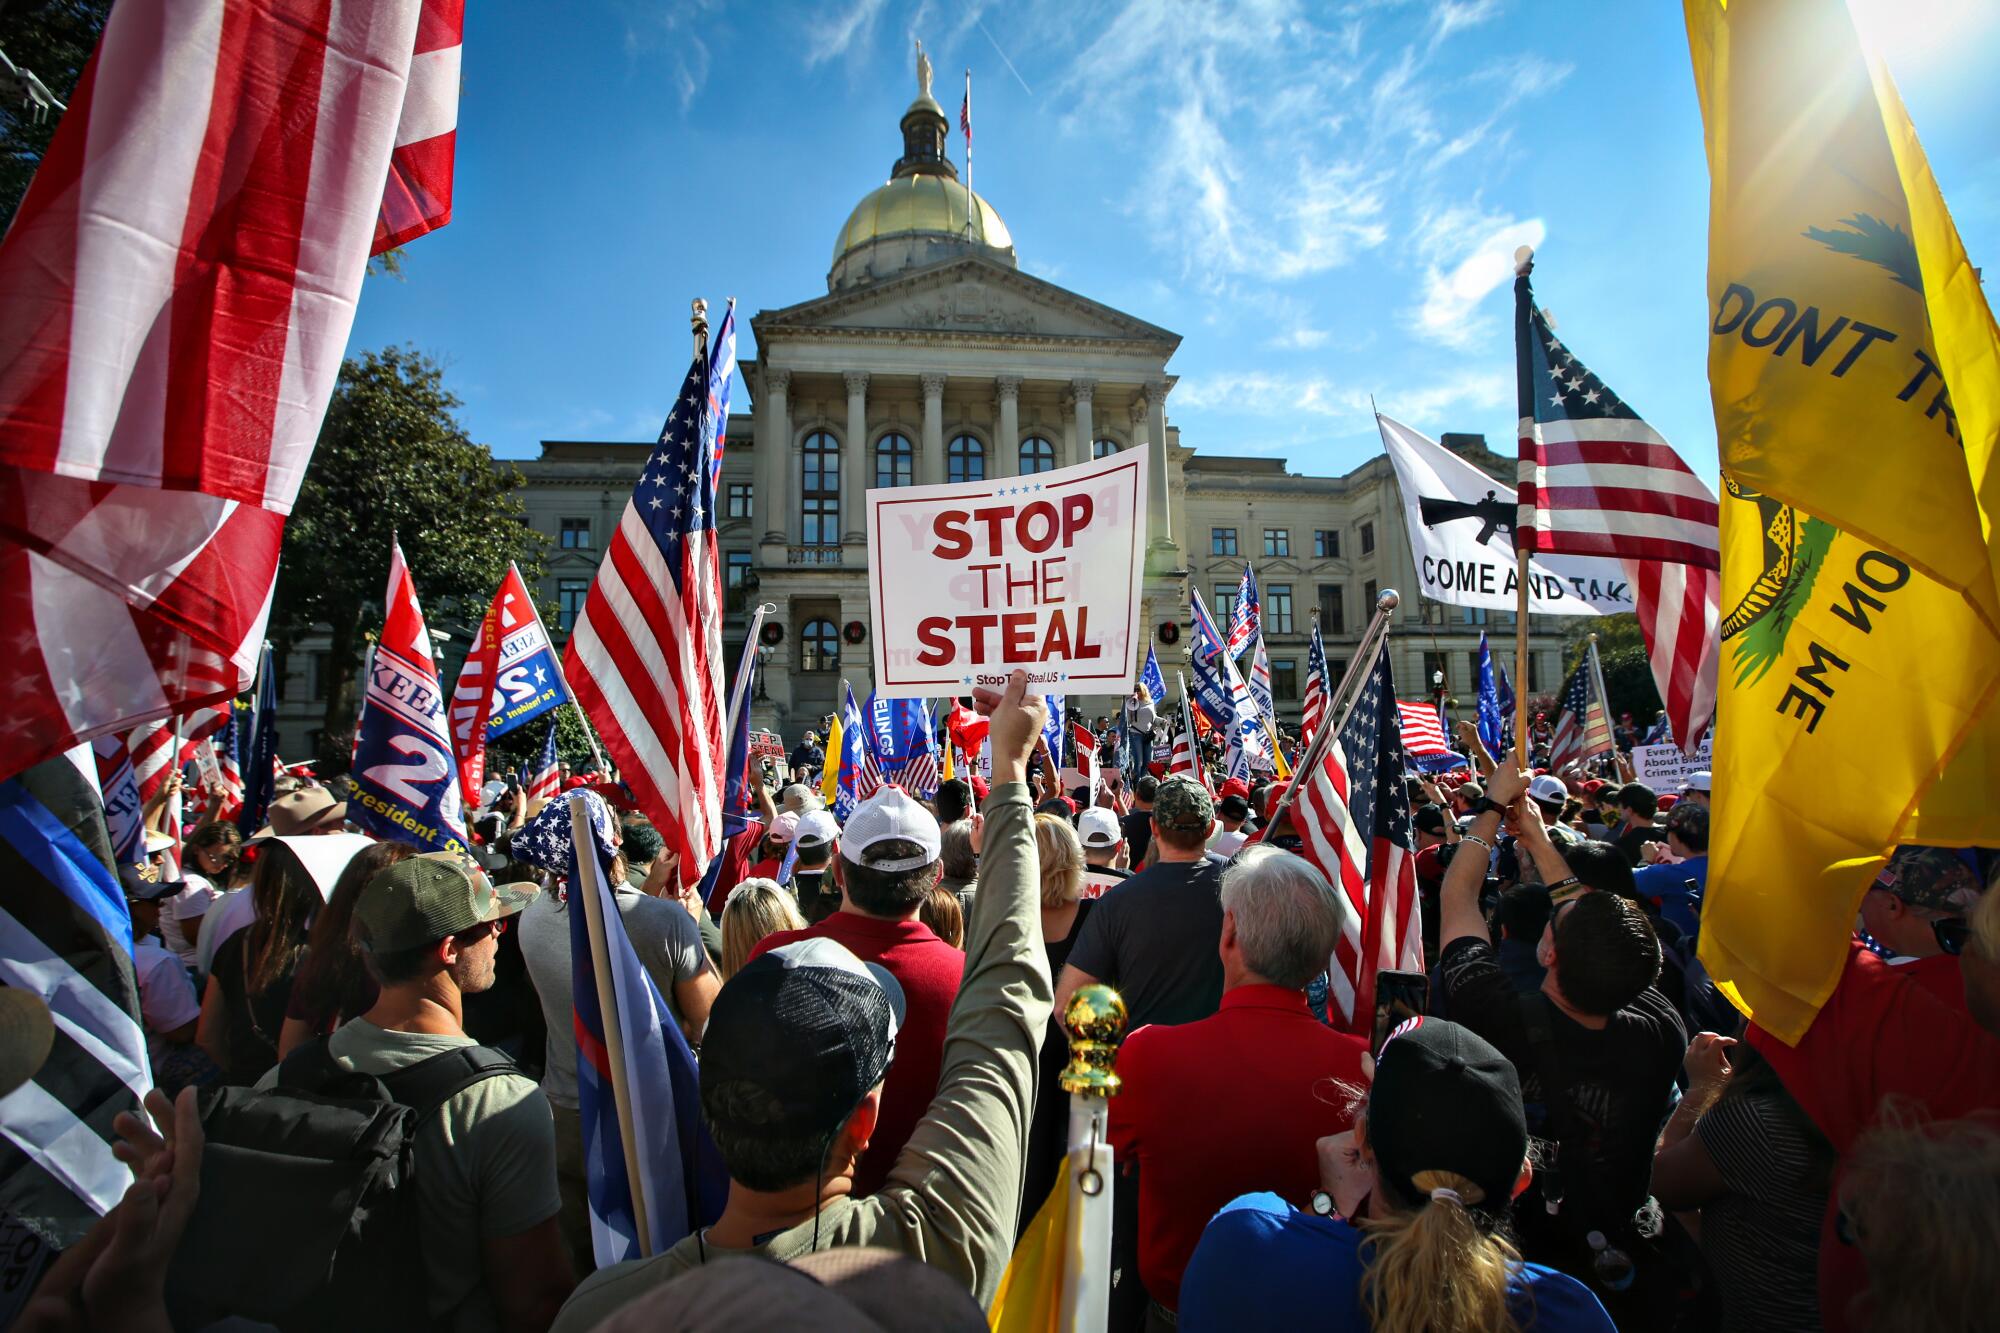 A crowd holding U.S. flags and a sign that says "Stop the Steal Trump" gather in front of a building with pillars and a dome